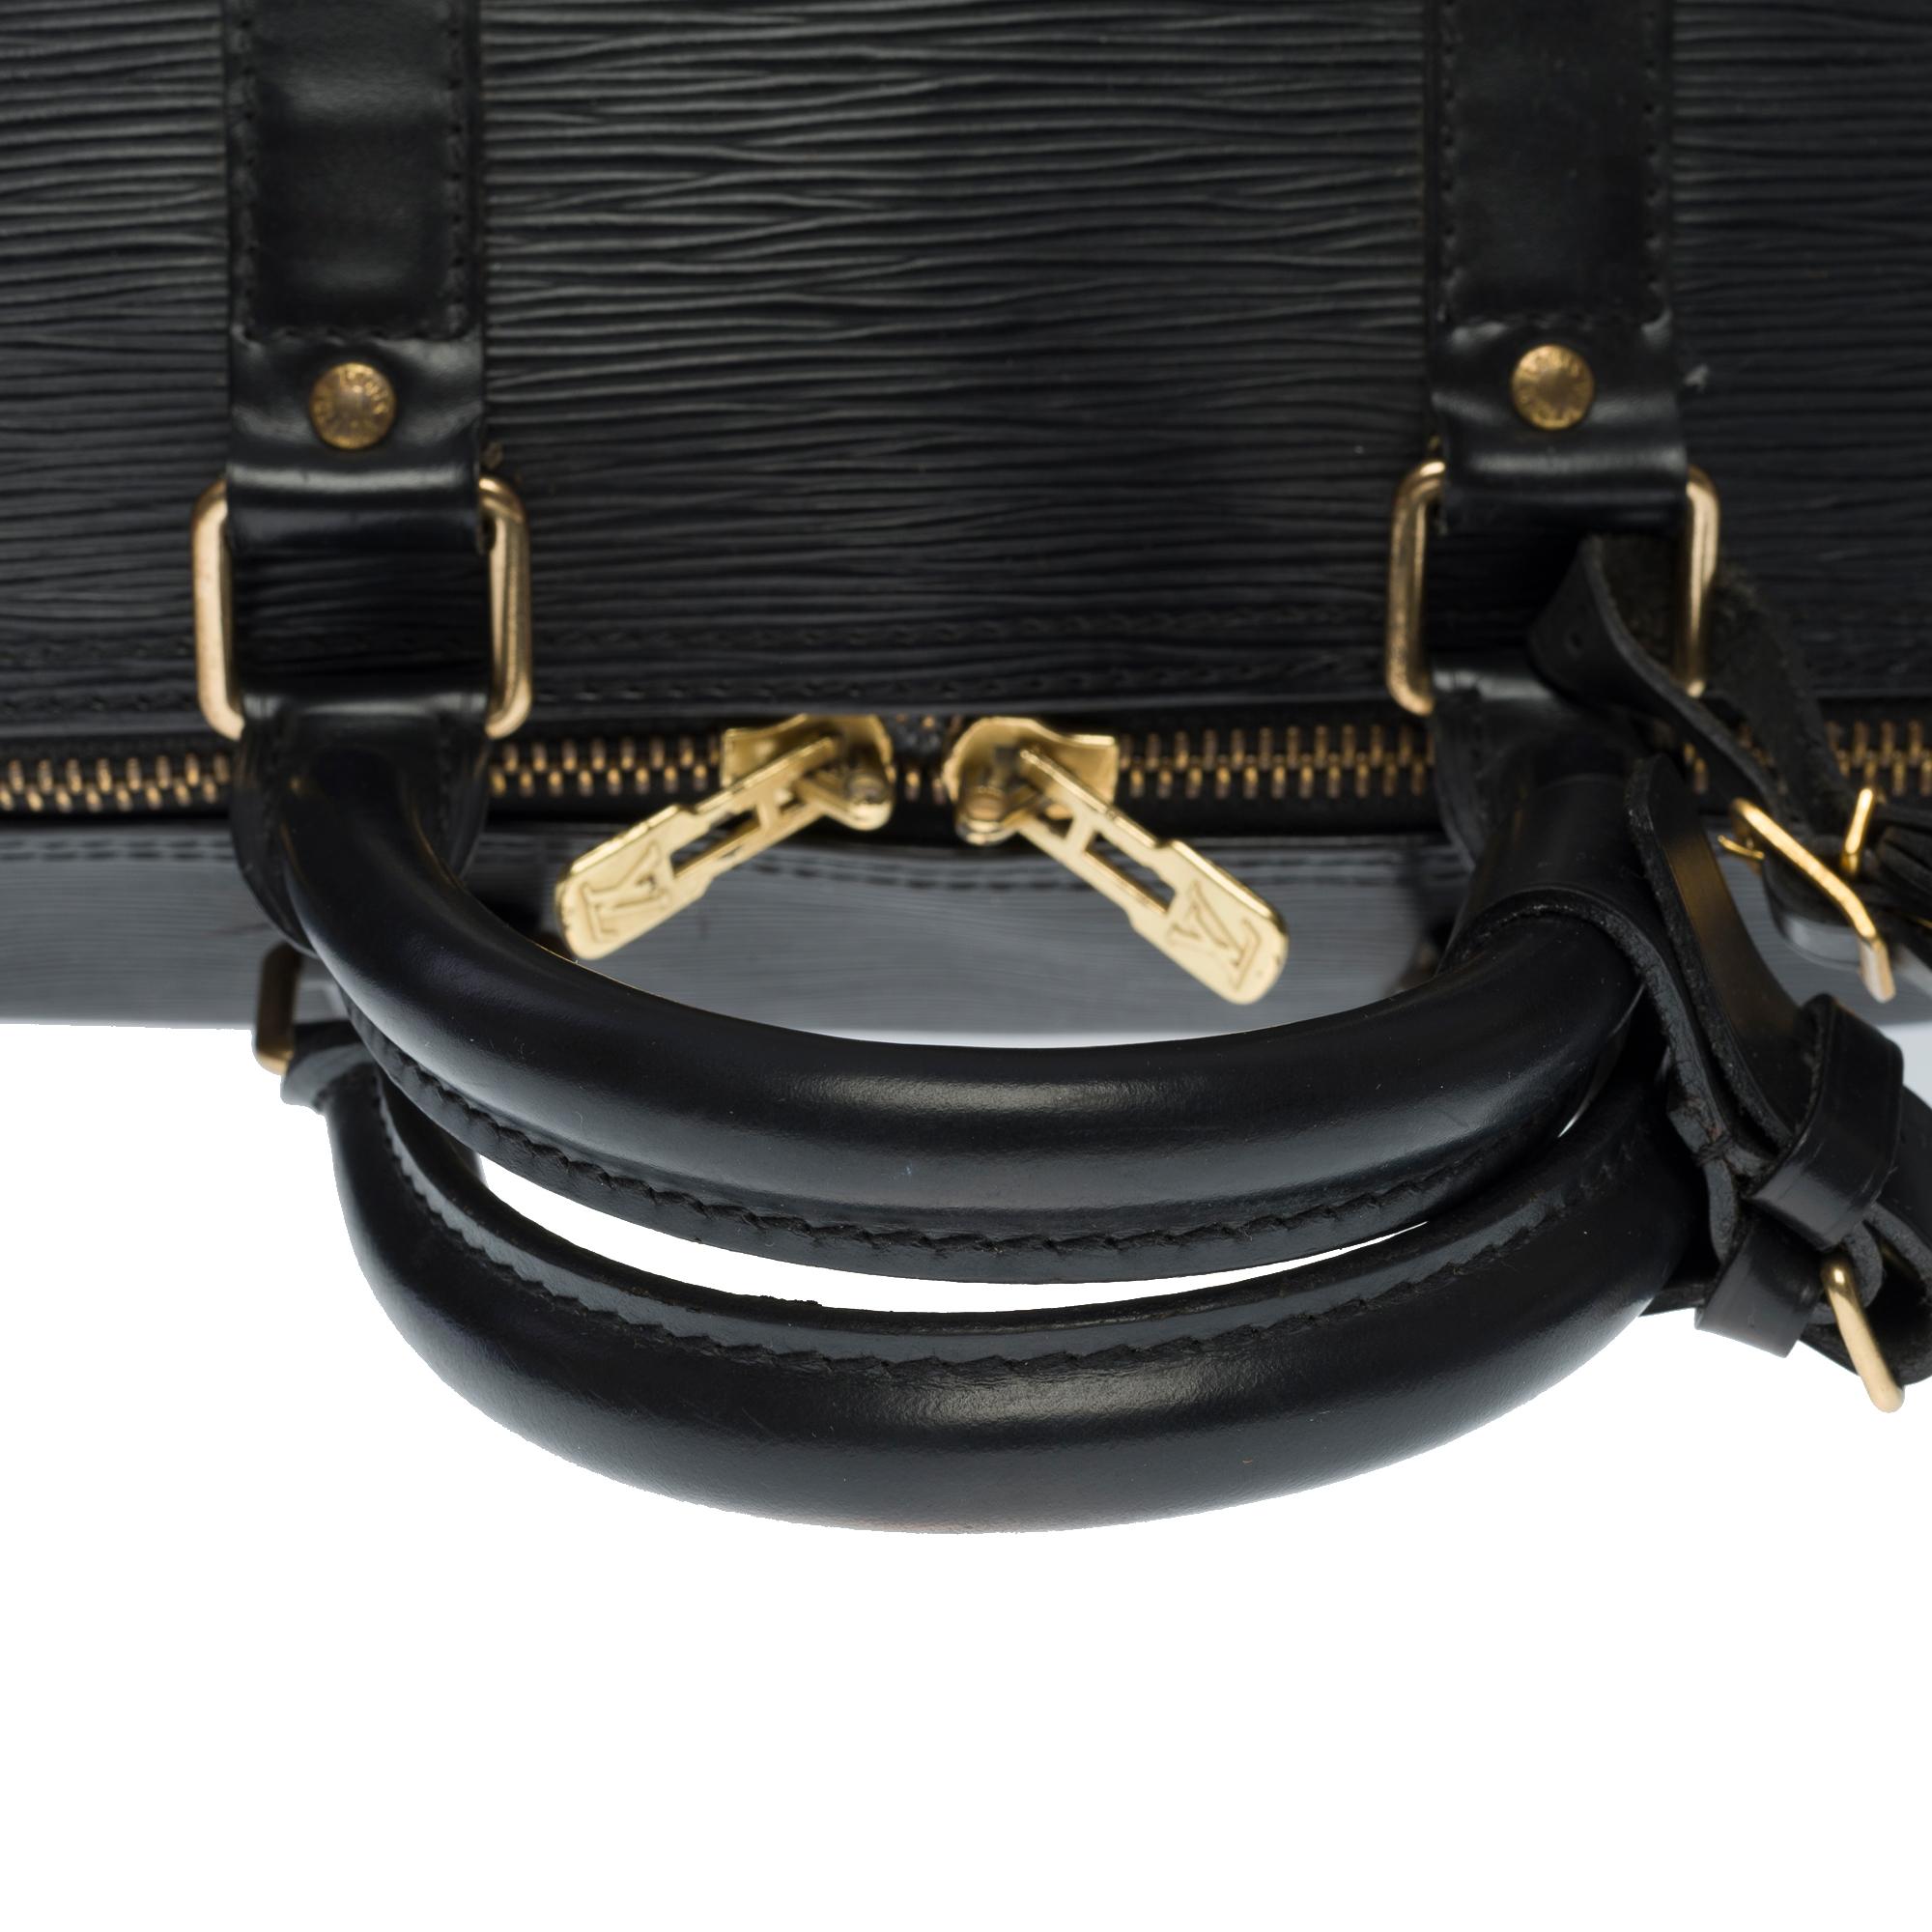 The very Chic Louis Vuitton Keepall 45 Travel bag in black epi leather, GHW 4